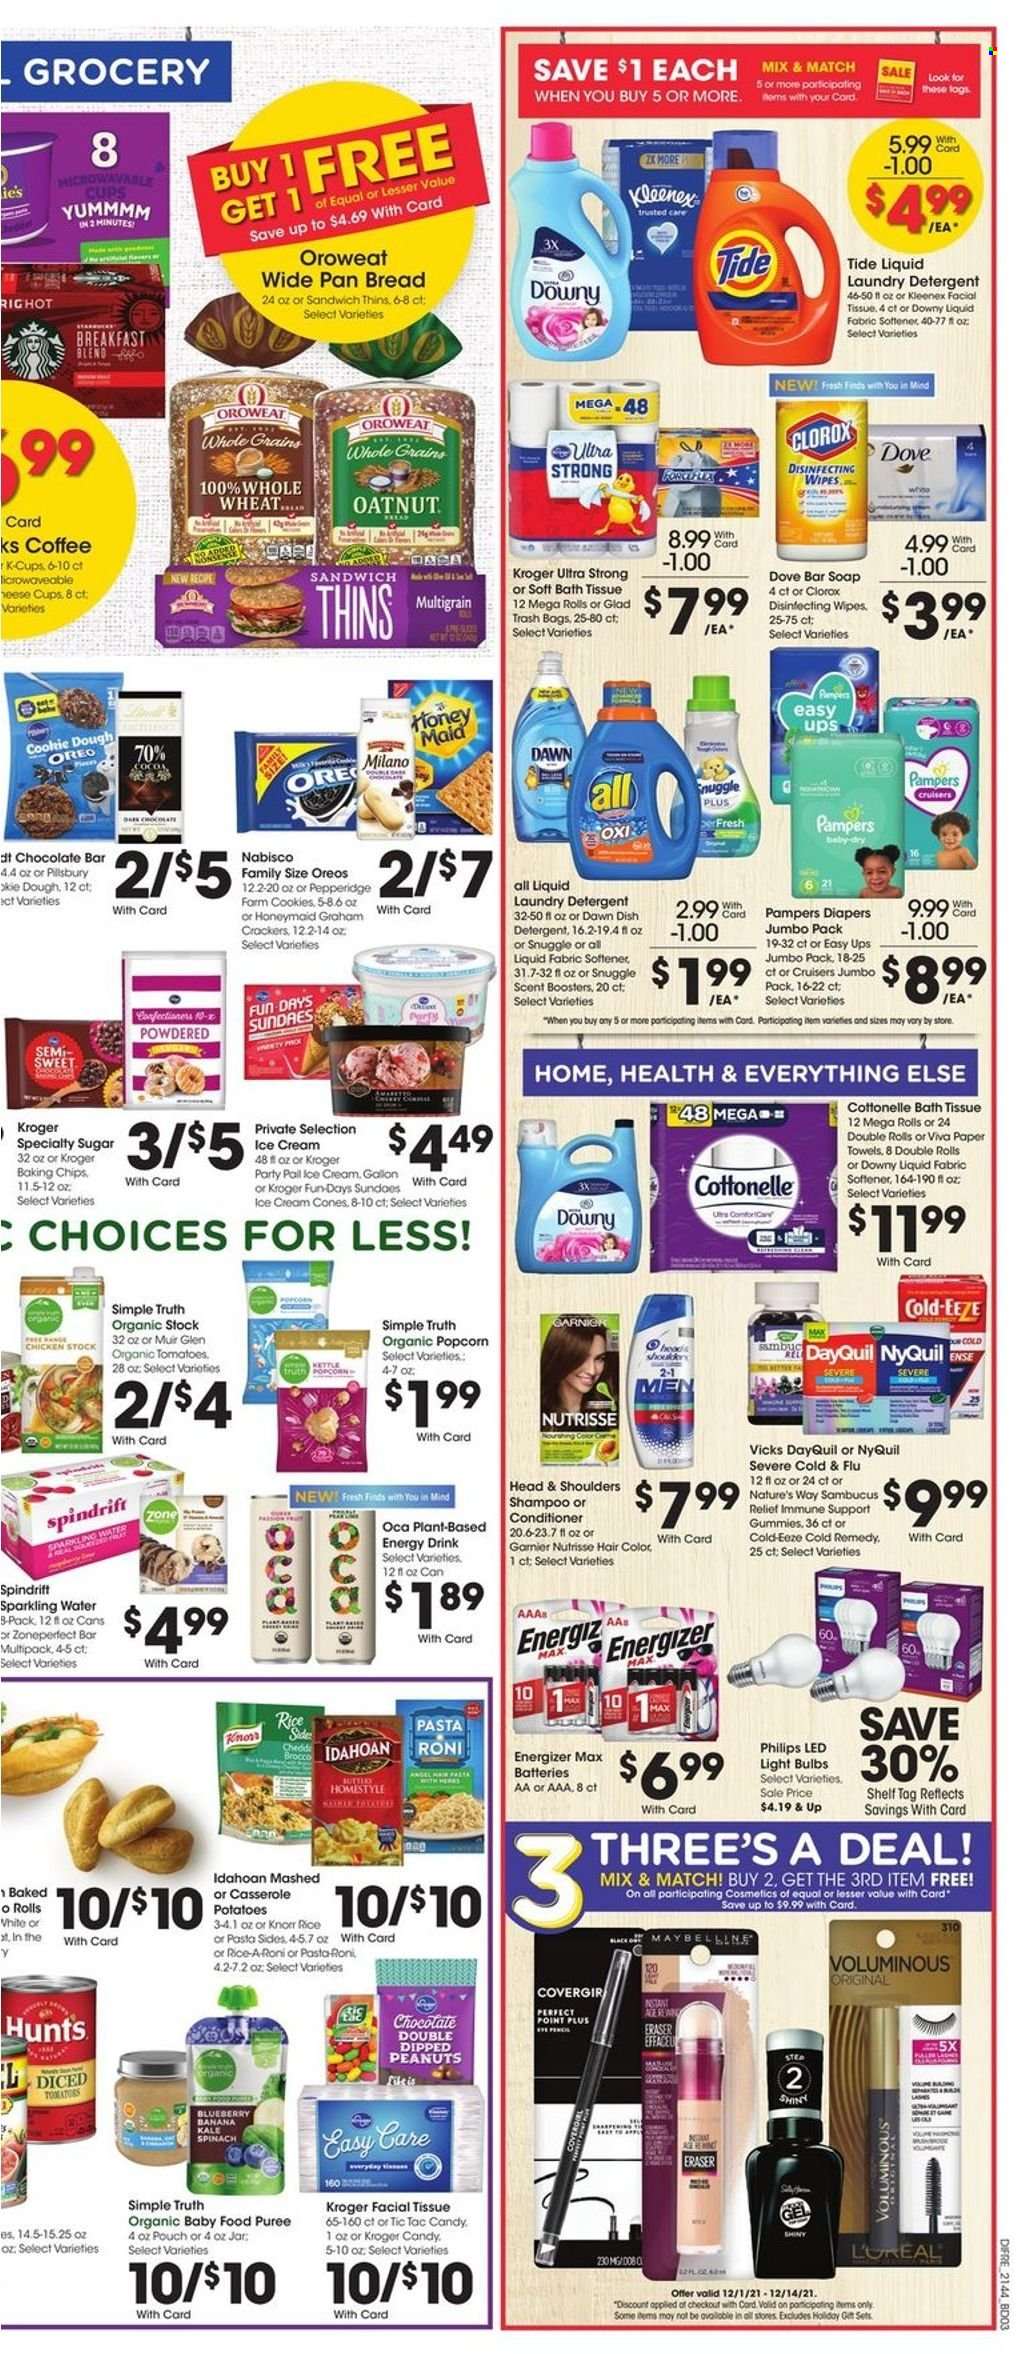 thumbnail - Baker's Flyer - 12/01/2021 - 12/07/2021 - Sales products - Philips, bread, kale, Knorr, Pillsbury, pasta sides, Oreo, ice cream, cookies, crackers, Tic Tac, chocolate bar, Thins, popcorn, cocoa, sugar, baking chips, Honey Maid, peanuts, energy drink, Spindrift, sparkling water, coffee, organic baby food, wipes, Pampers, nappies, Dove, bath tissue, Cottonelle, Kleenex, kitchen towels, paper towels, detergent, Clorox, Snuggle, Tide, fabric softener, laundry detergent, scent booster, Downy Laundry, shampoo, soap bar, soap, Garnier, conditioner, Head & Shoulders, hair color, Vicks, trash bags, gallon, pan, casserole, cup, eraser, battery, bulb, Energizer, light bulb, LED light, DayQuil, Cold & Flu, NyQuil, Cold-EEZE. Page 7.